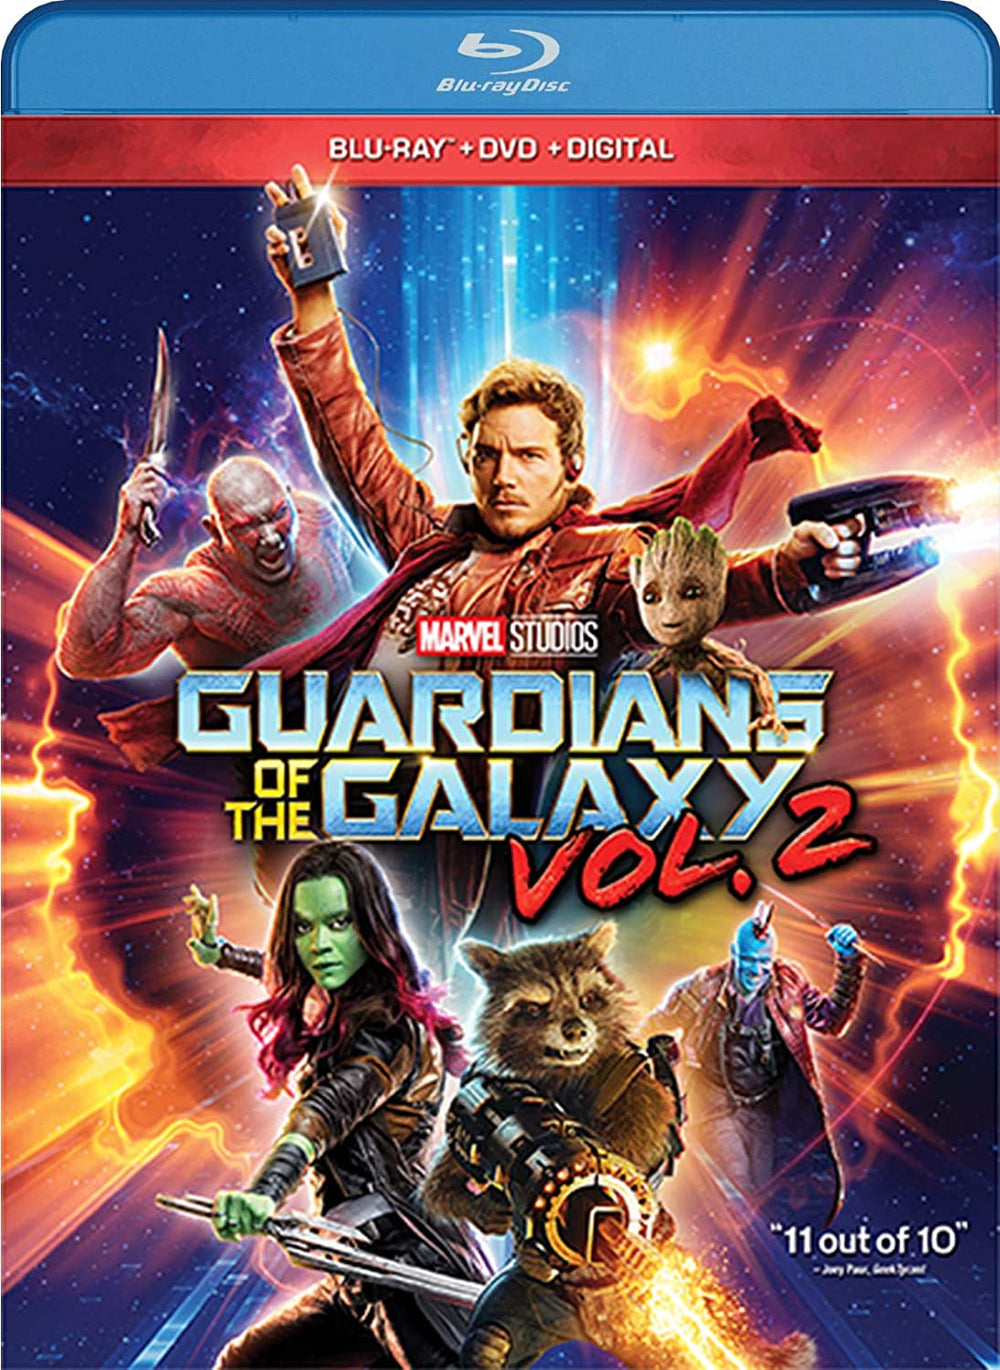 Guardians of the Galaxy Vol. 2 Blu-ray Used